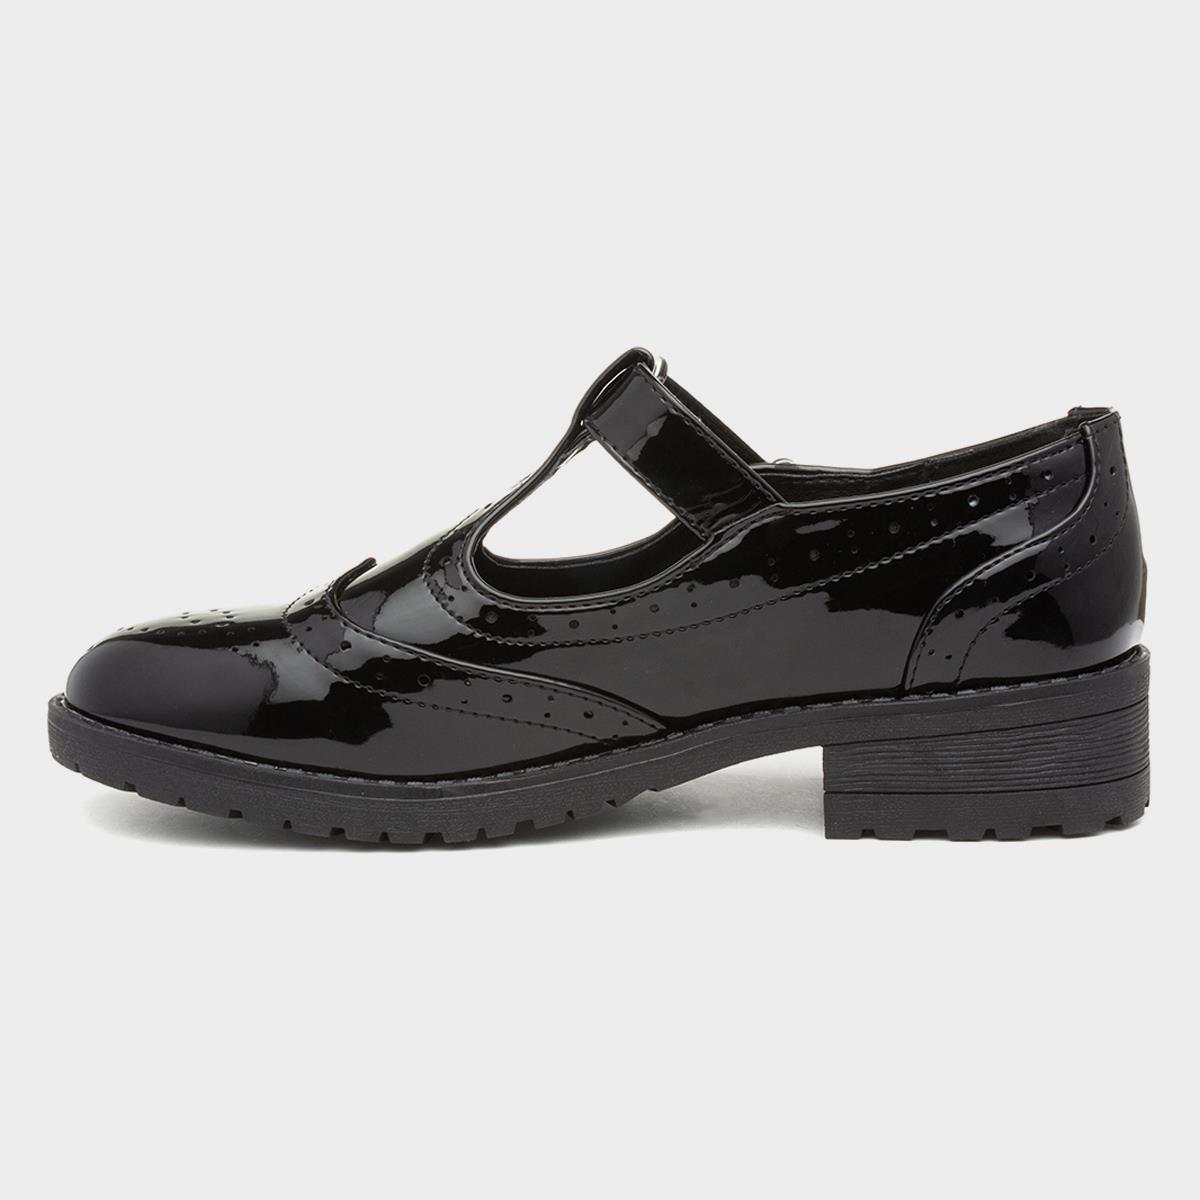 Lilley Girls Black Patent Brogue T-Bar Shoe with Buckle Fasten and Chunky Sole